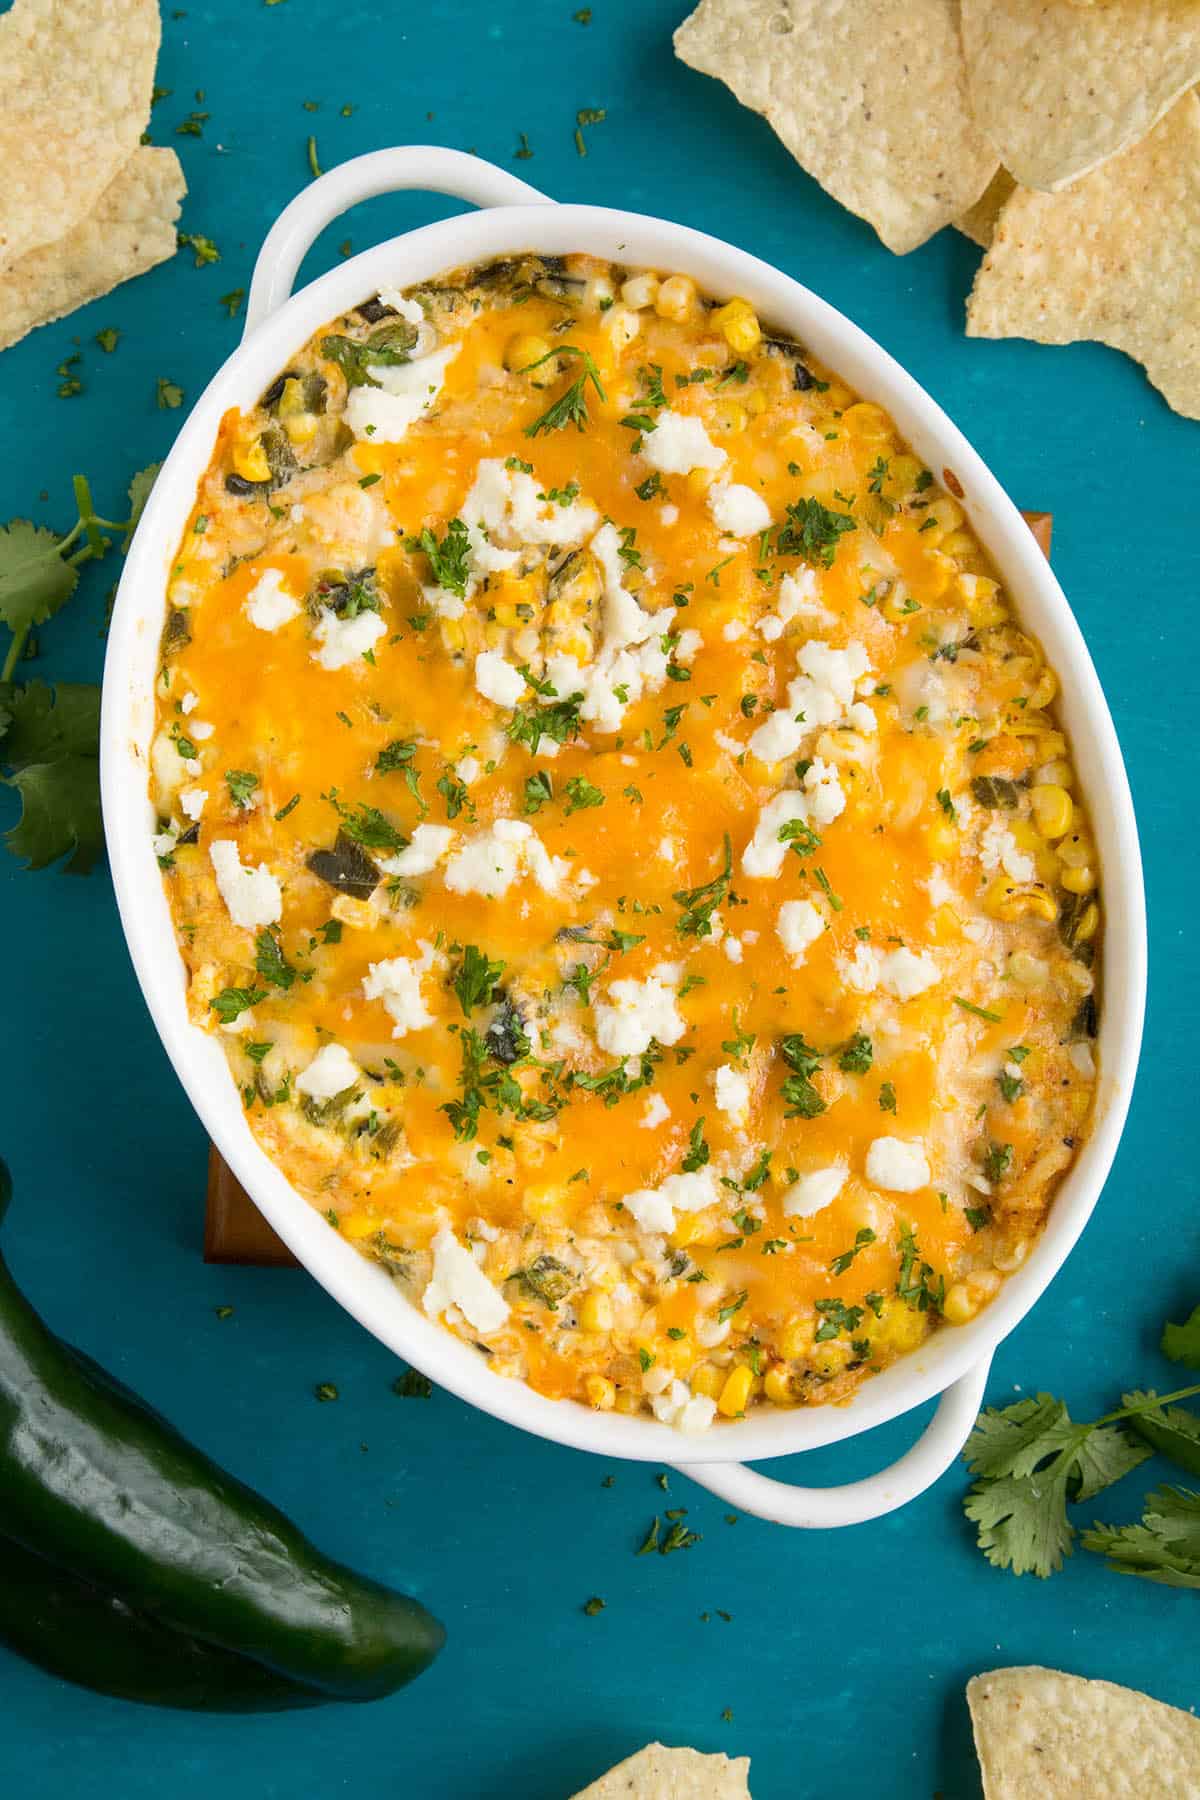 This cheese dip is ready to serve, with roasted poblano peppers and corn.